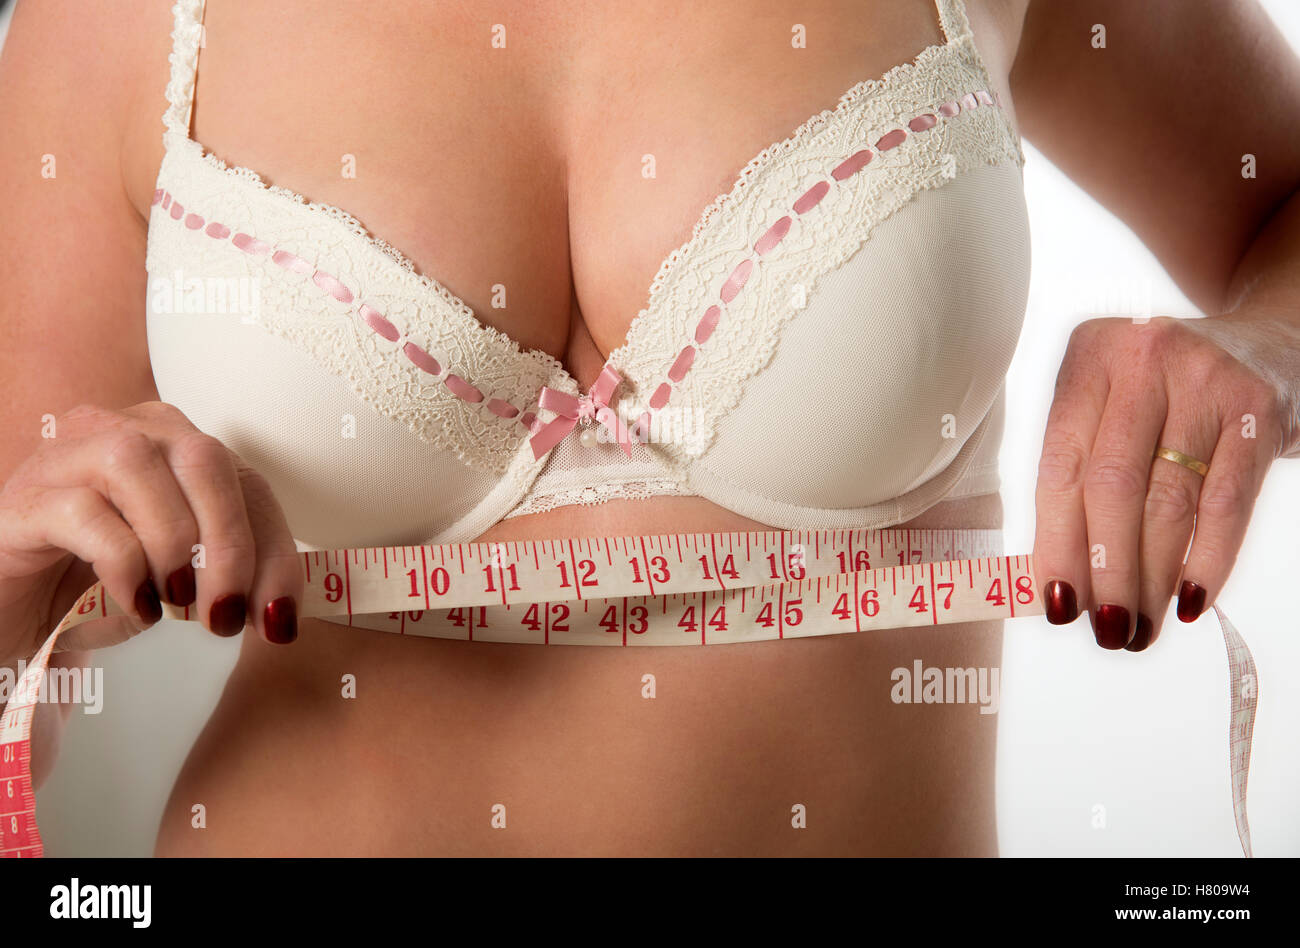 Middle aged woman checking under bra measurement using a tape measure Stock Photo